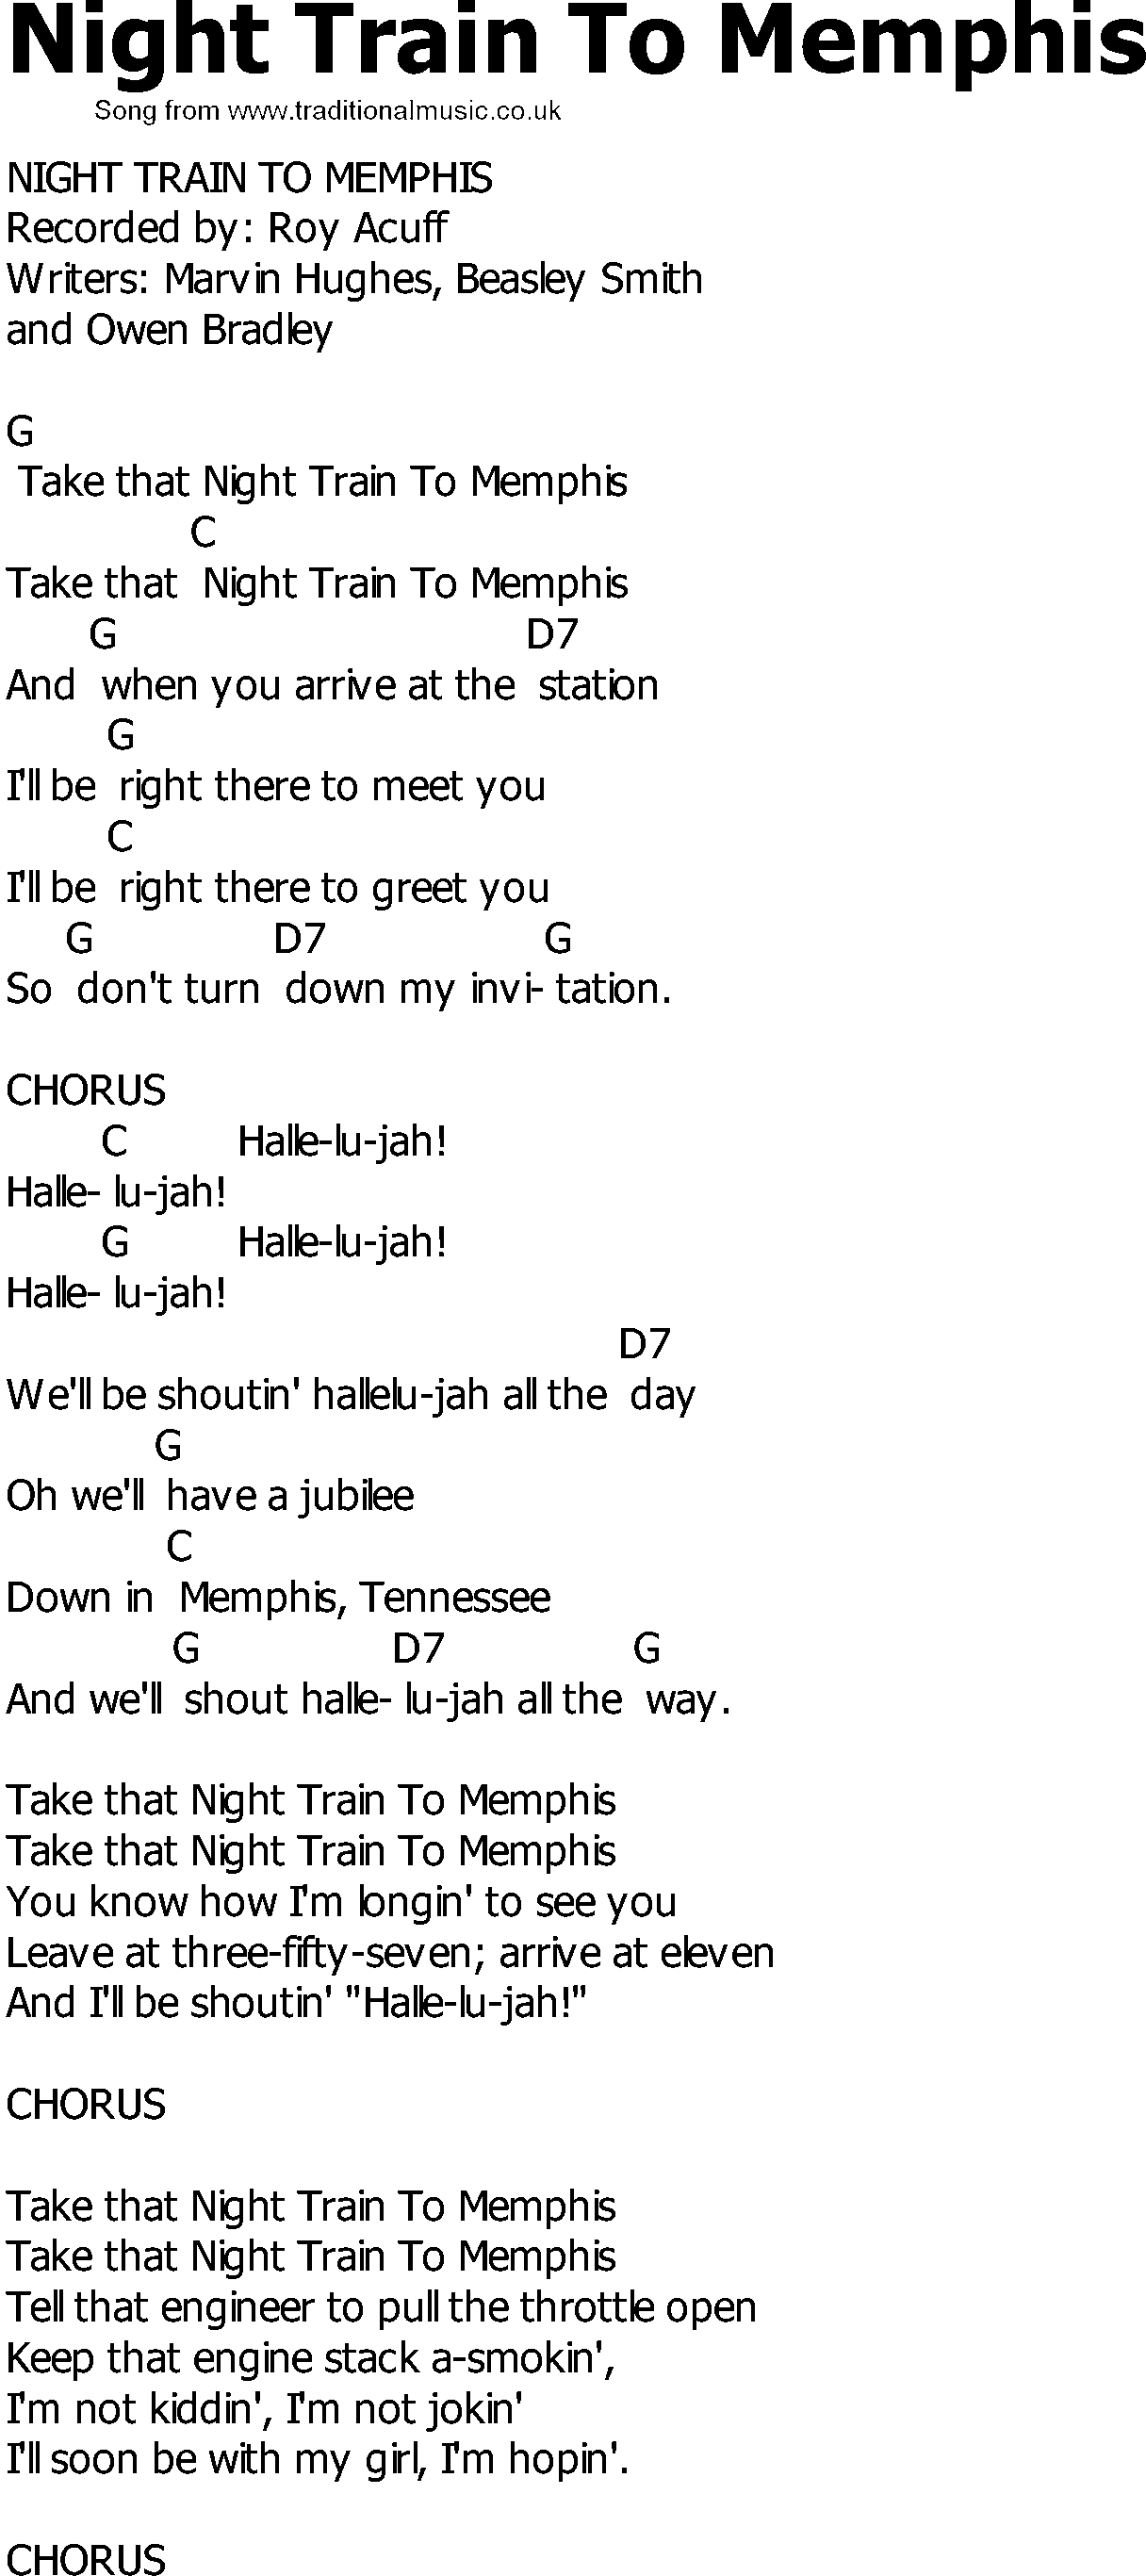 Old Country song lyrics with chords - Night Train To Memphis